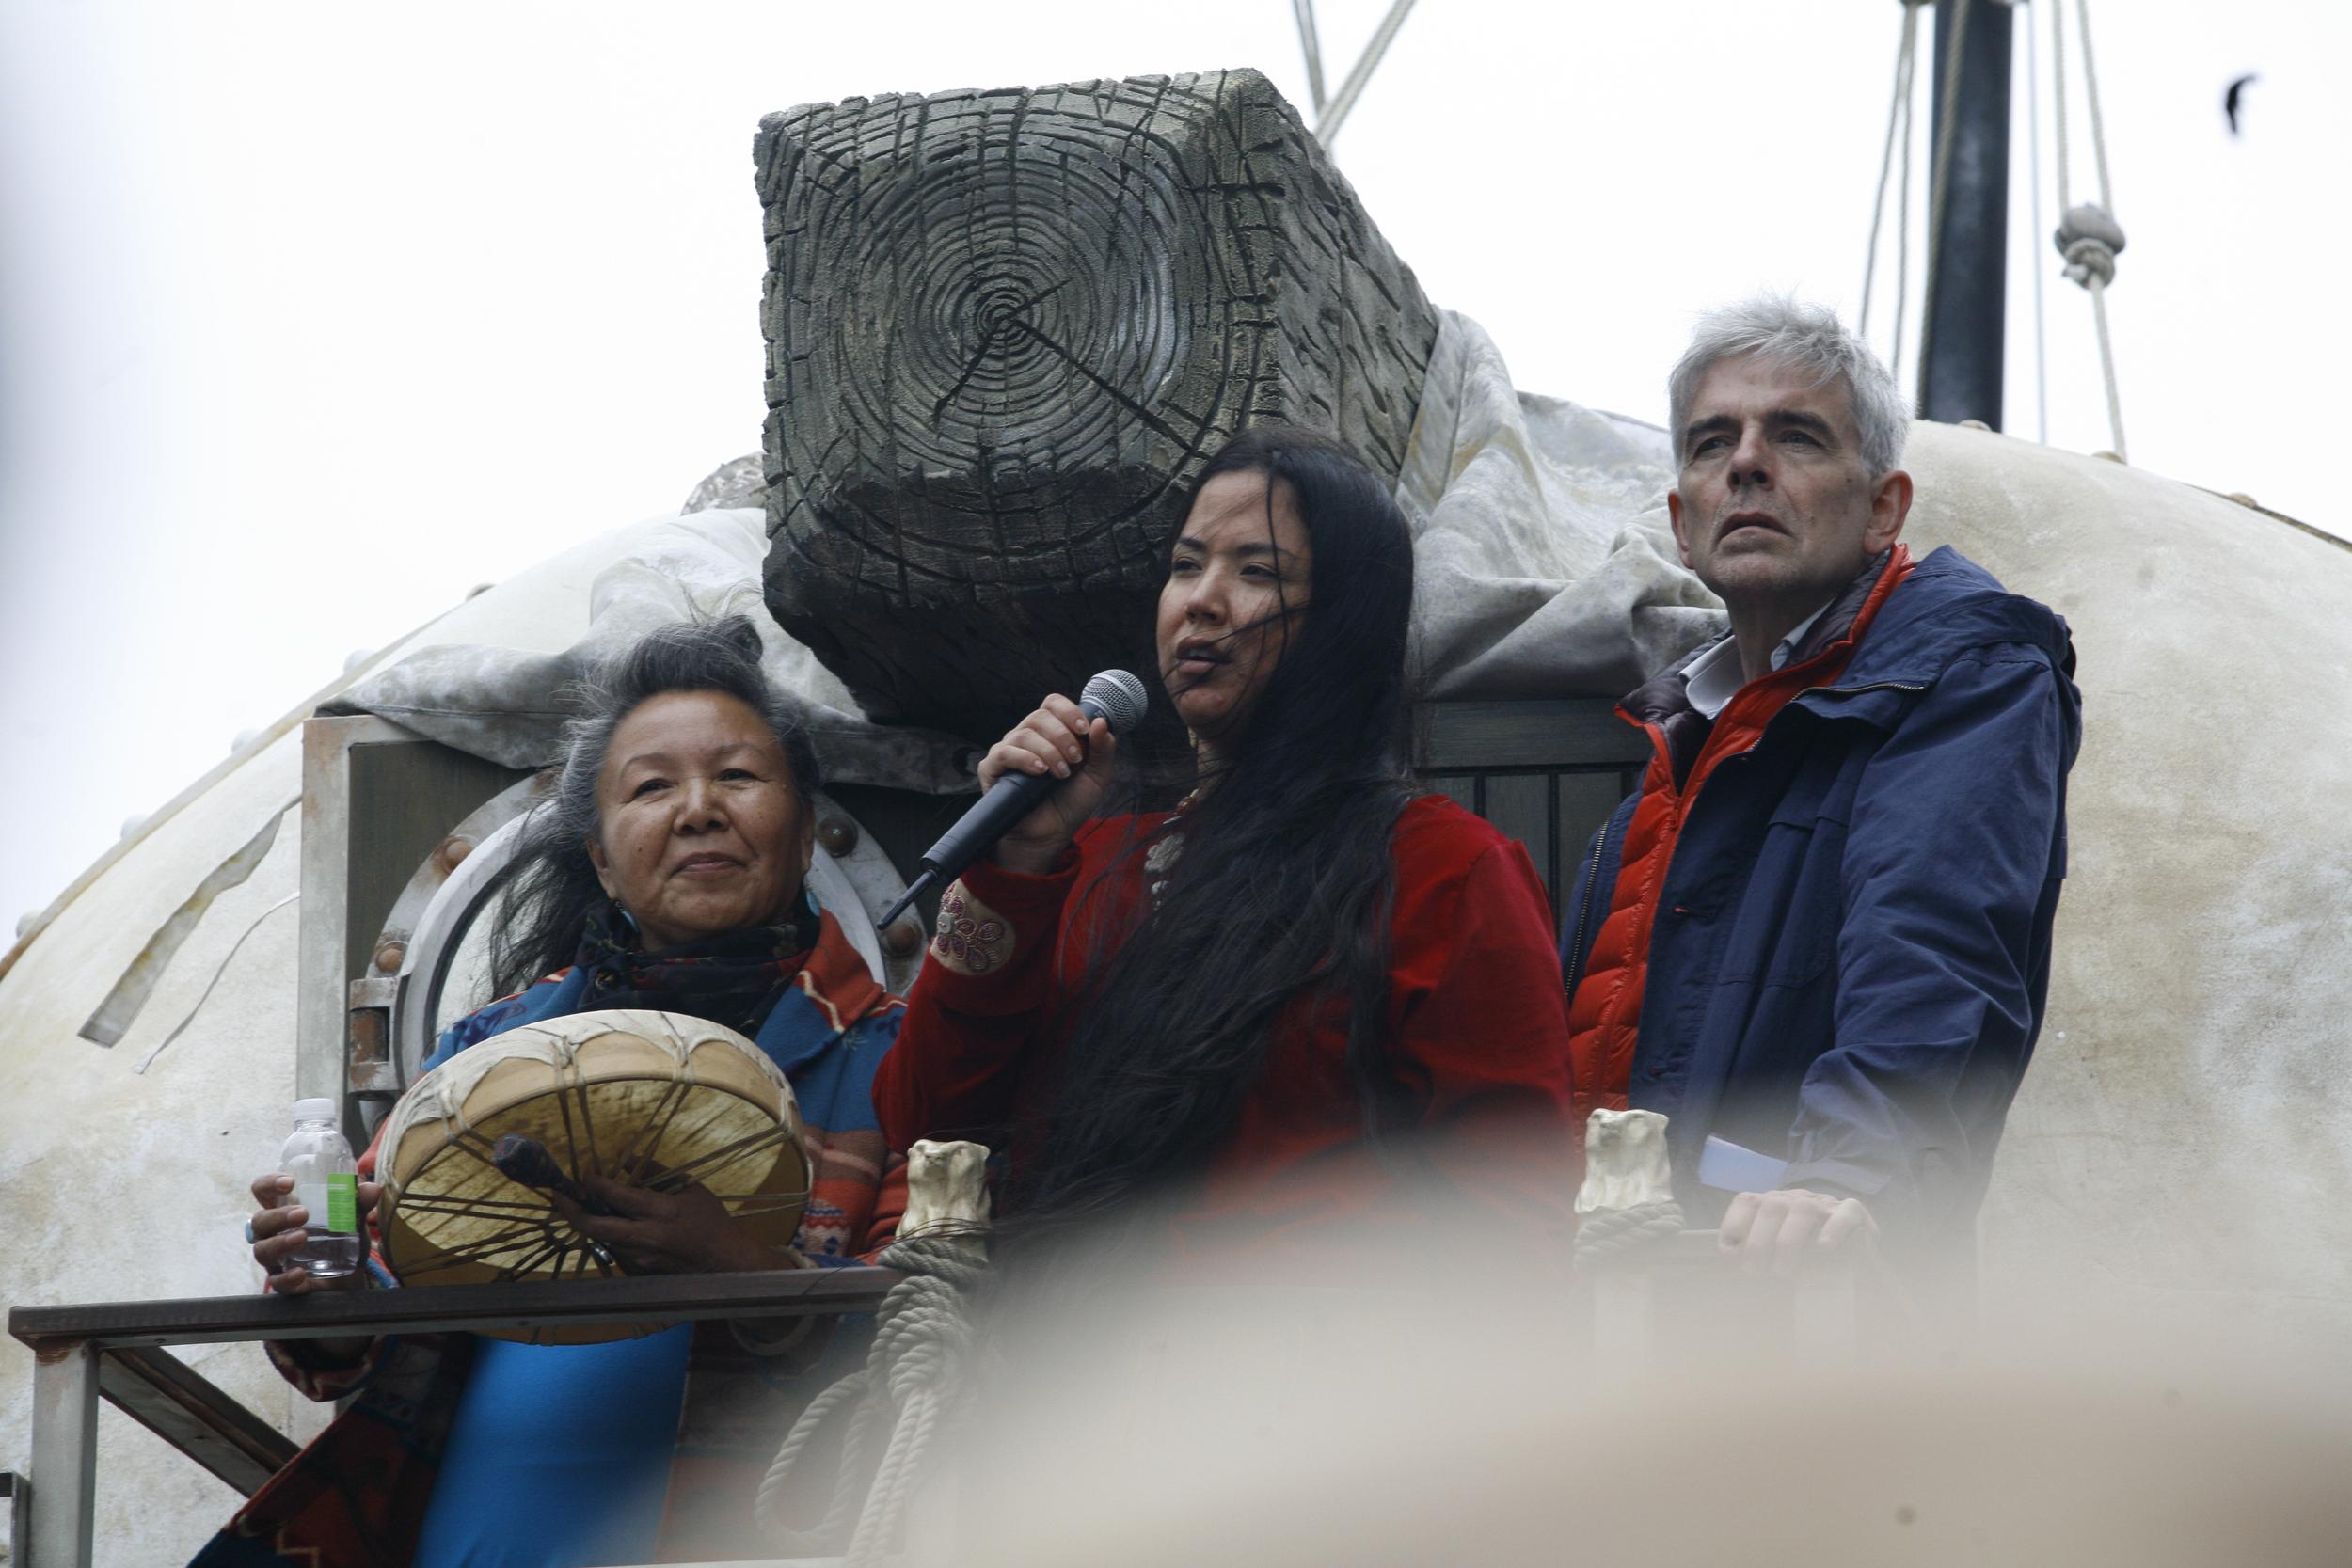 Three activists stand on a stage in cold weather gear. One speaks into a microphone.